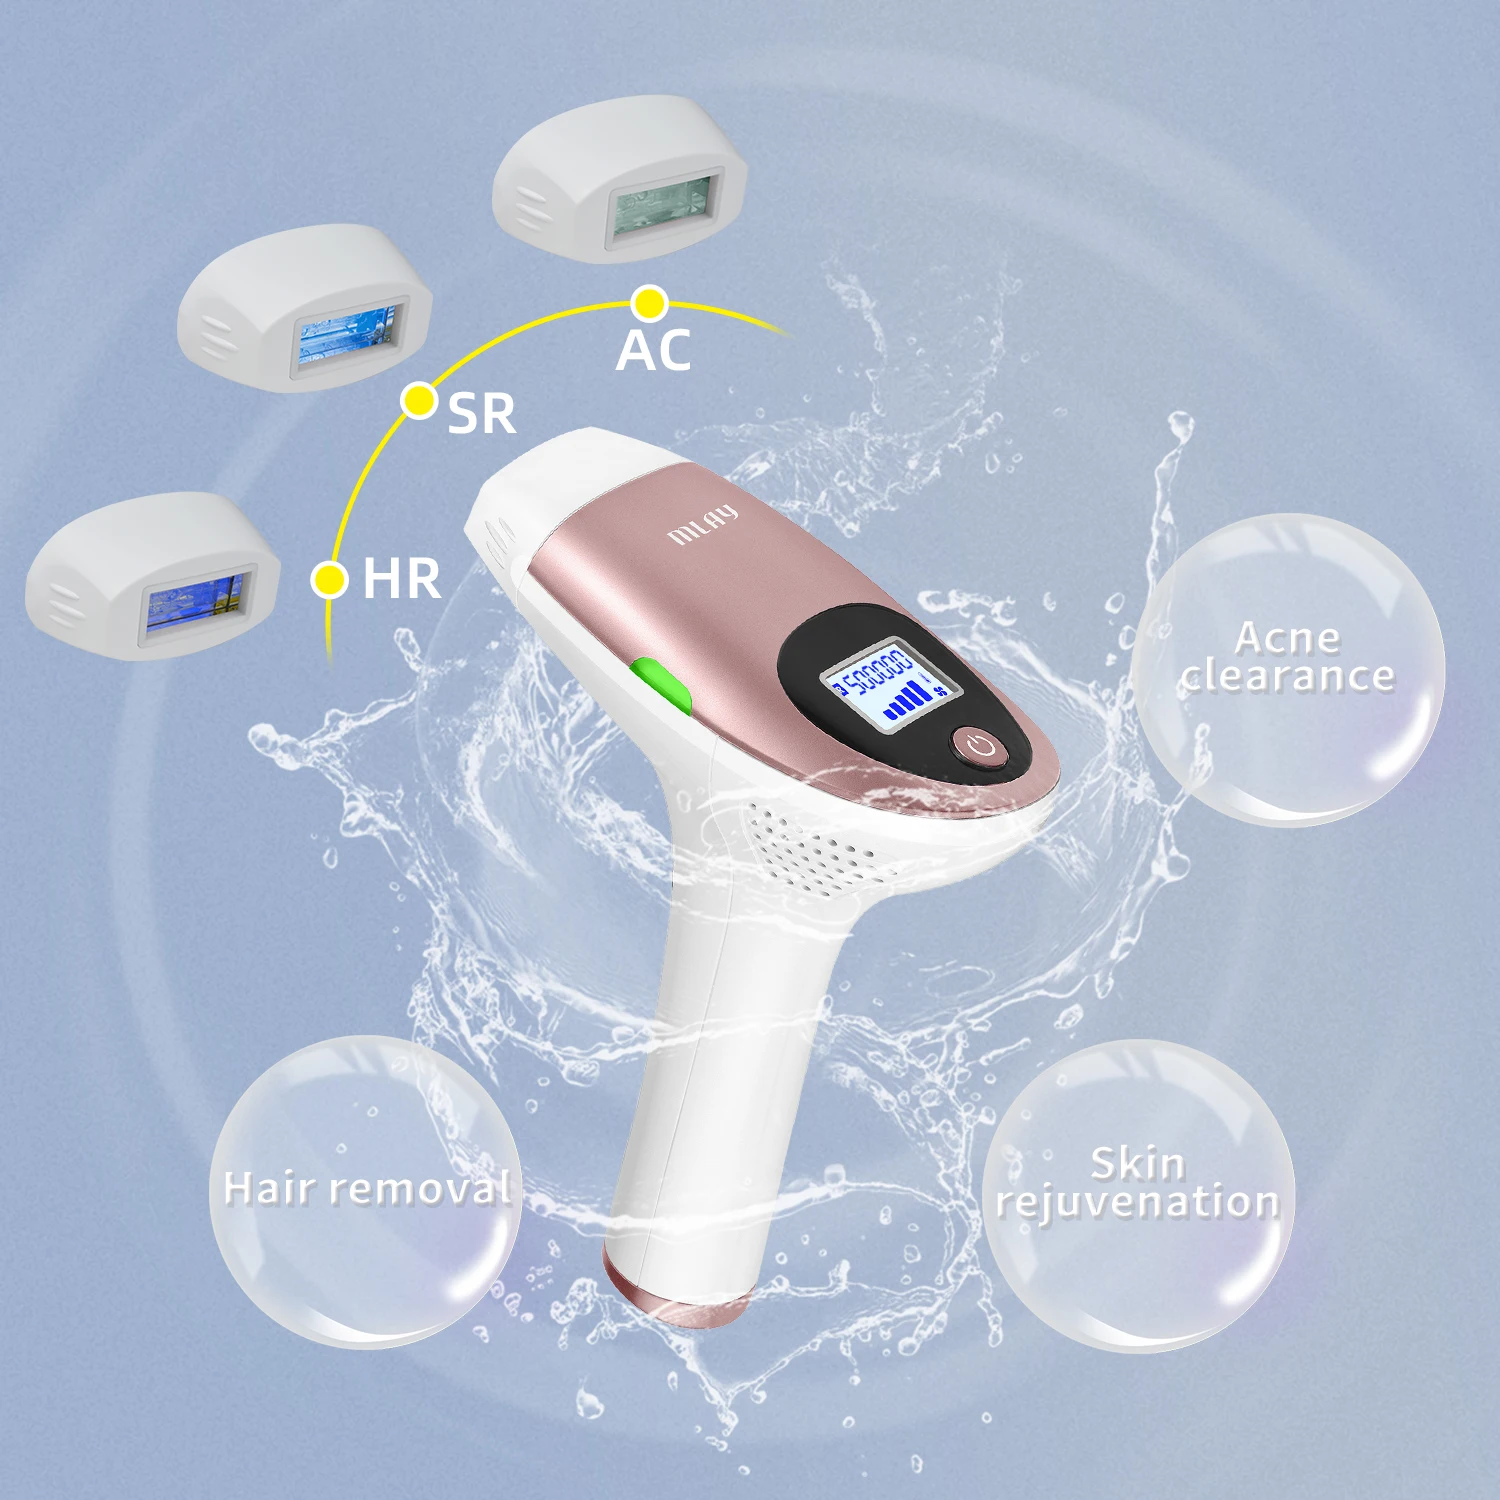 MLAY Laser Home use IPL Wholesale laser hair remover ODM OEM Latest mini IPL hair removal device